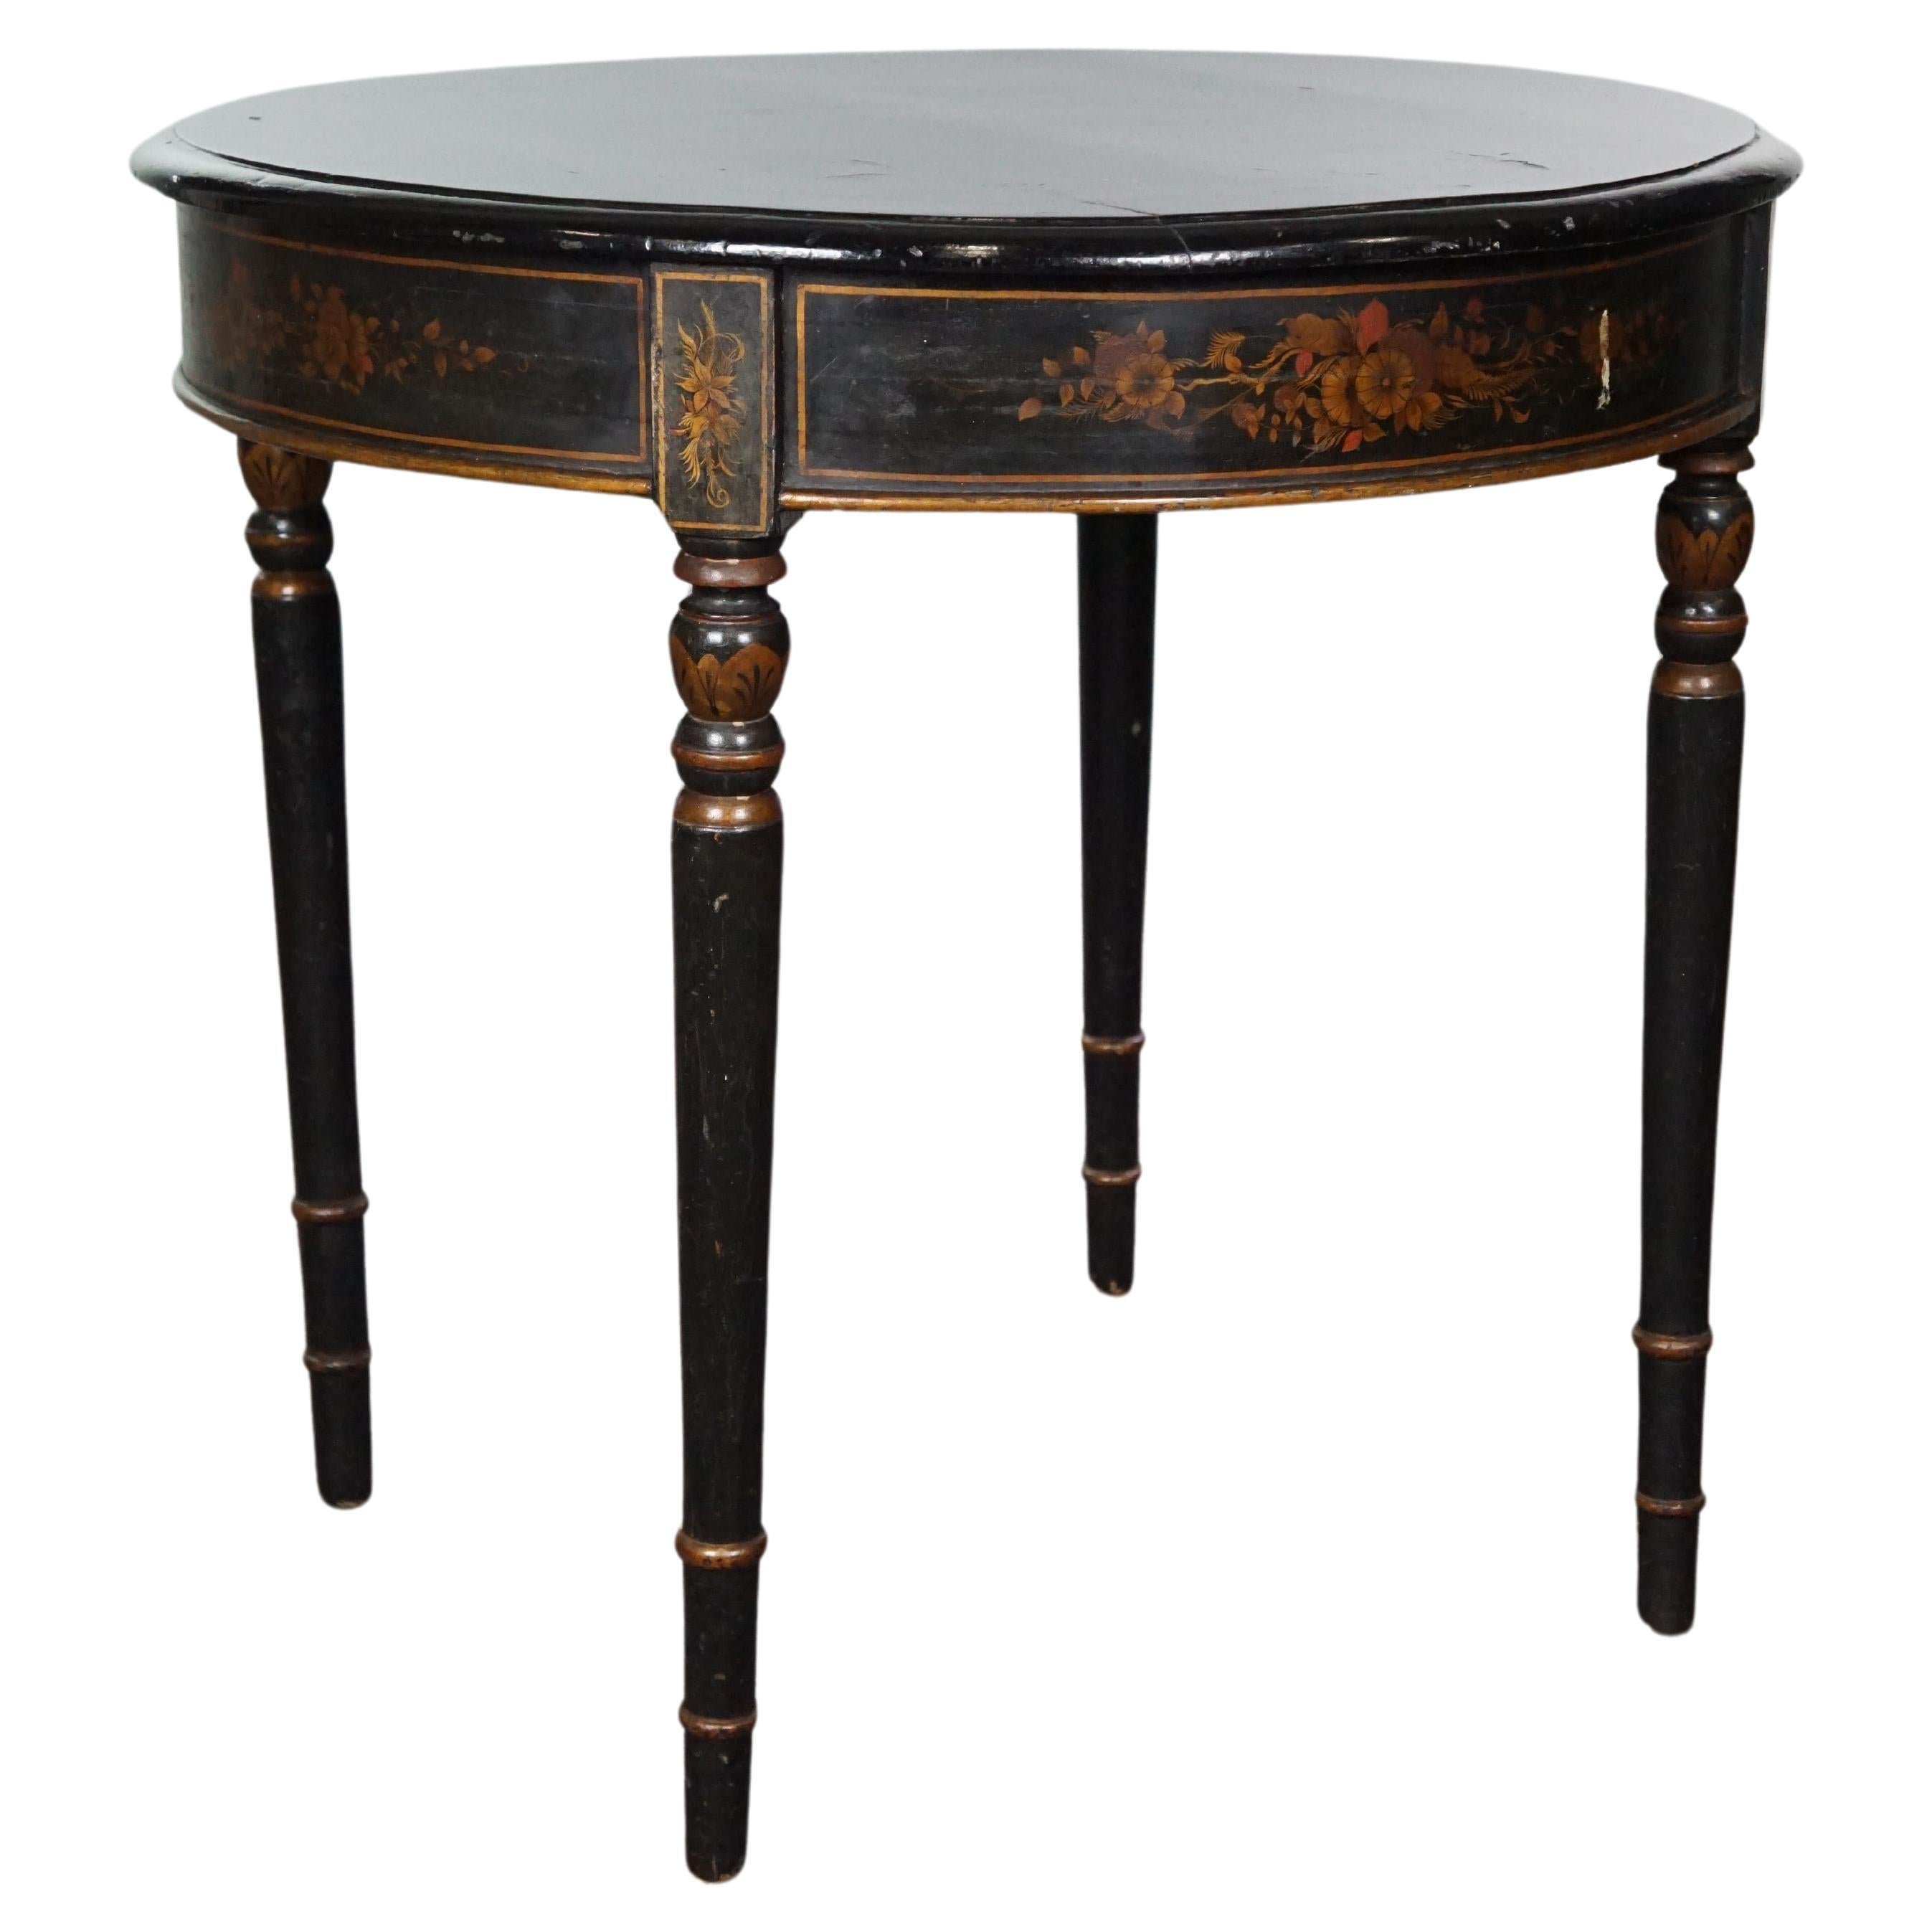 Enchanting lacquered antique side table with Japanese/Eastern influences For Sale